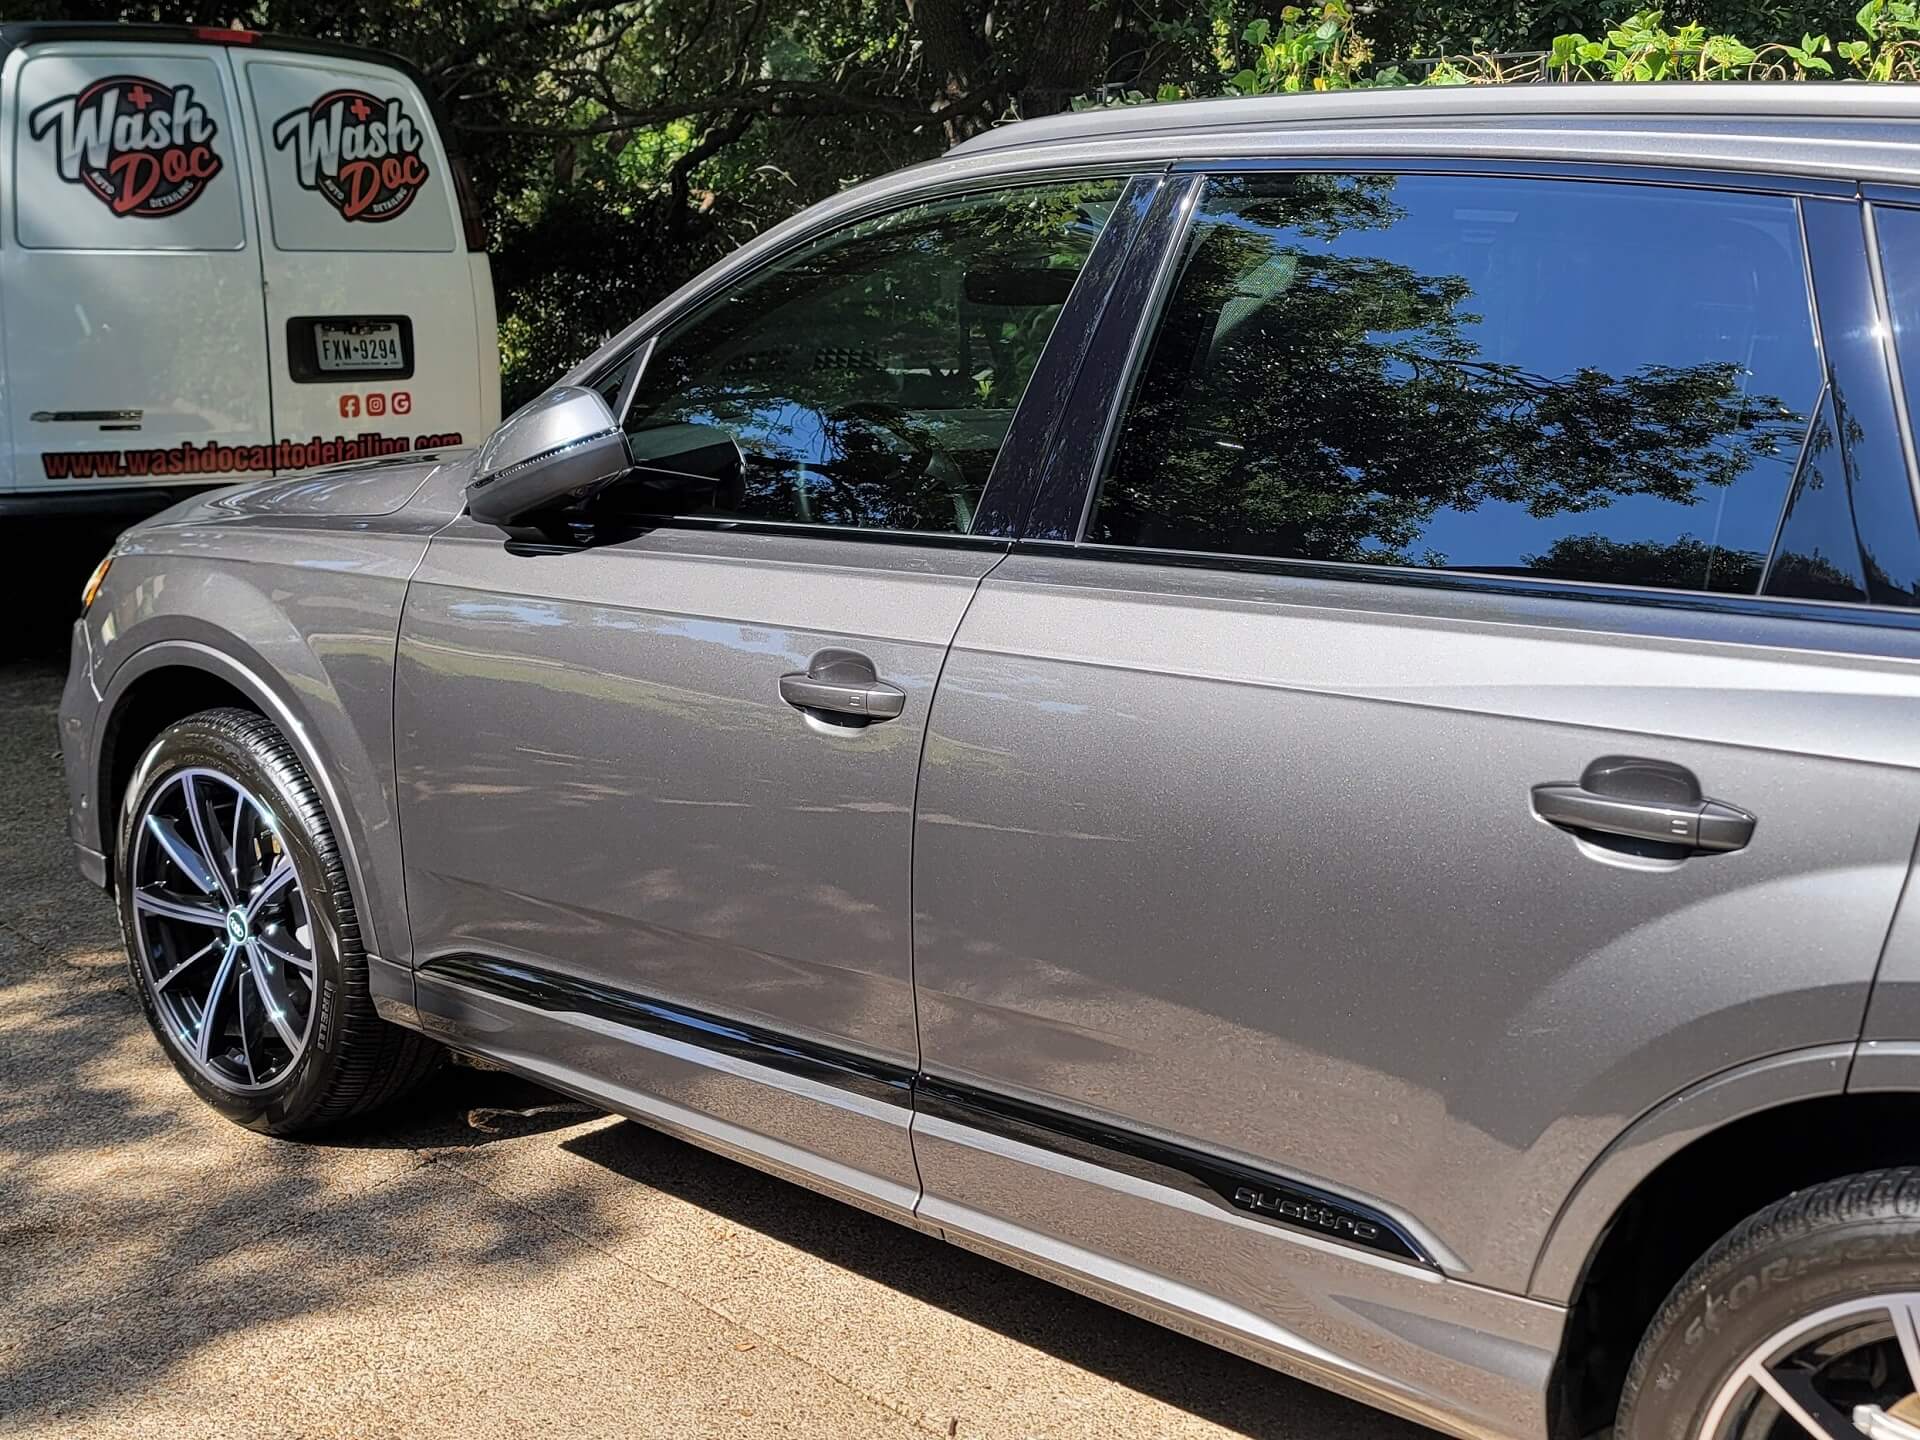 silver suvs car ceramic coating services wash doc auto detailing fort worth tx